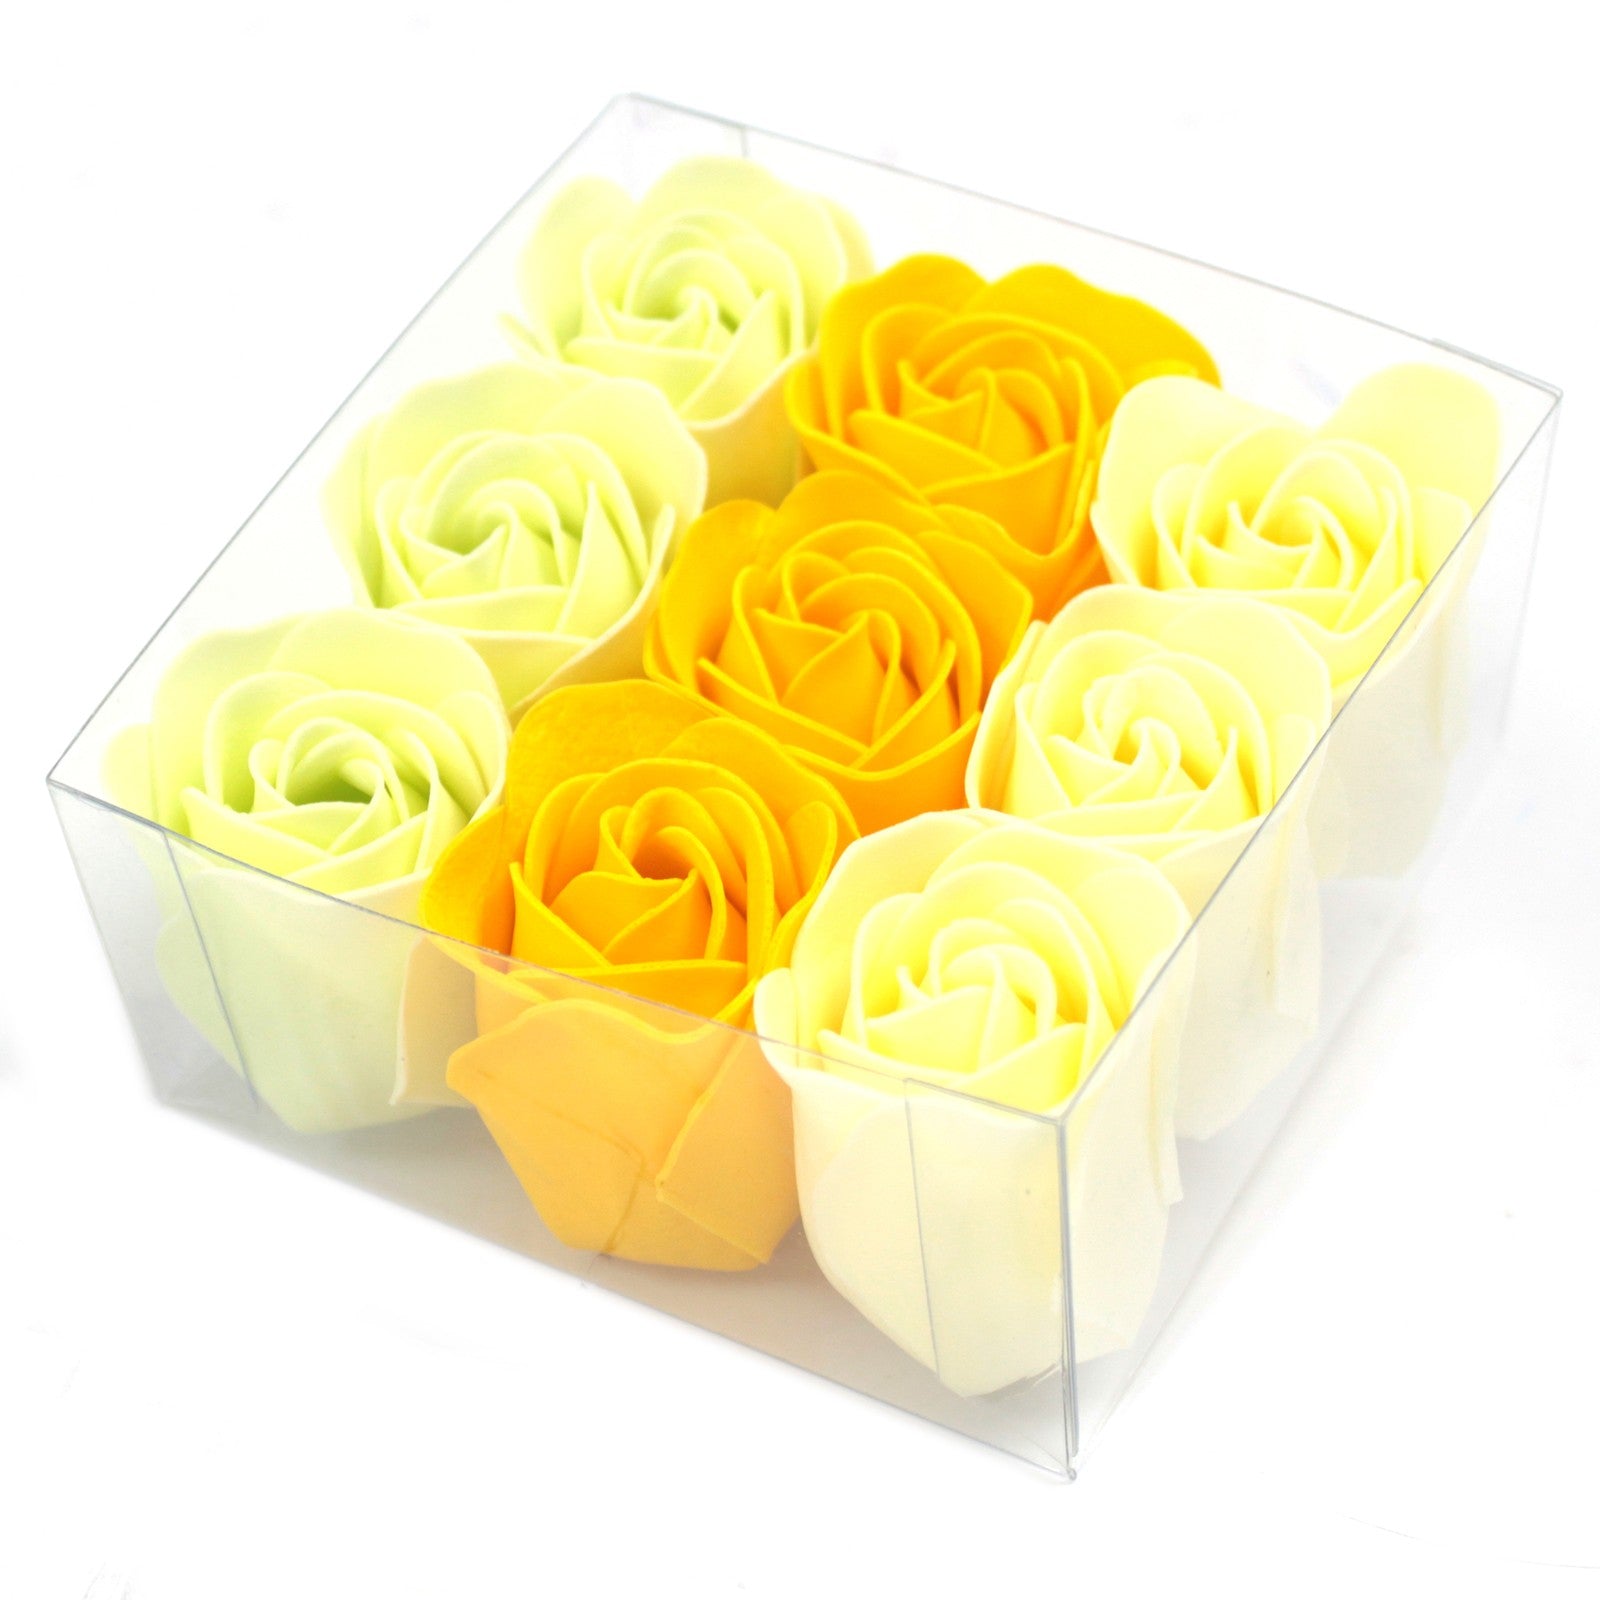 Soap Flowers - Set of 9 Spring Roses